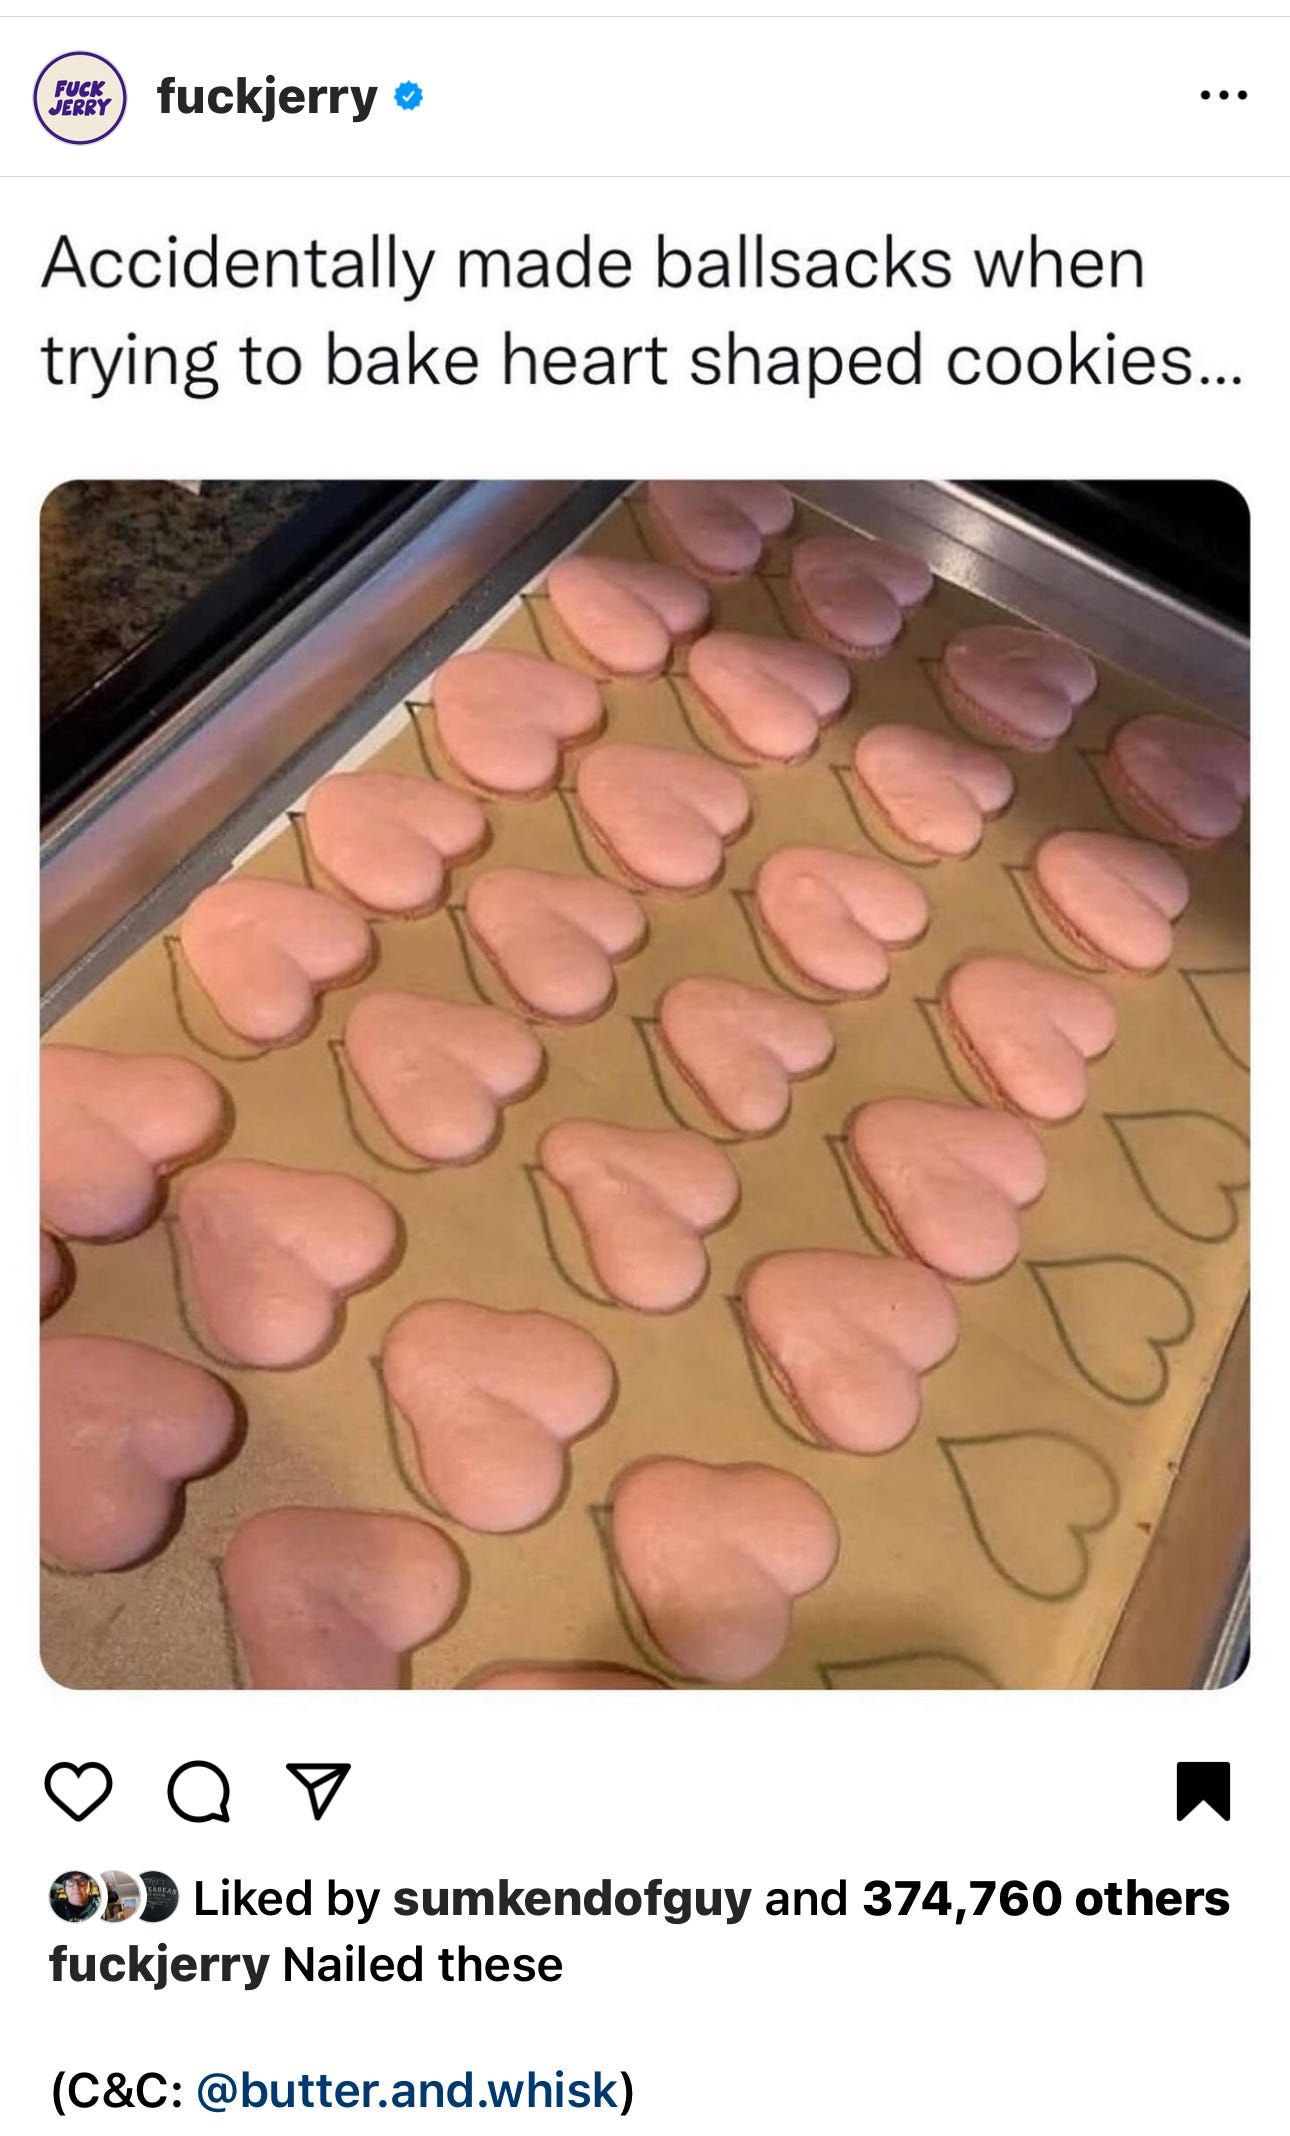 A baking sheet with pink heart-shaped cookies captioned "accidentally made ball sacs when trying to make heart-shaped cookies"